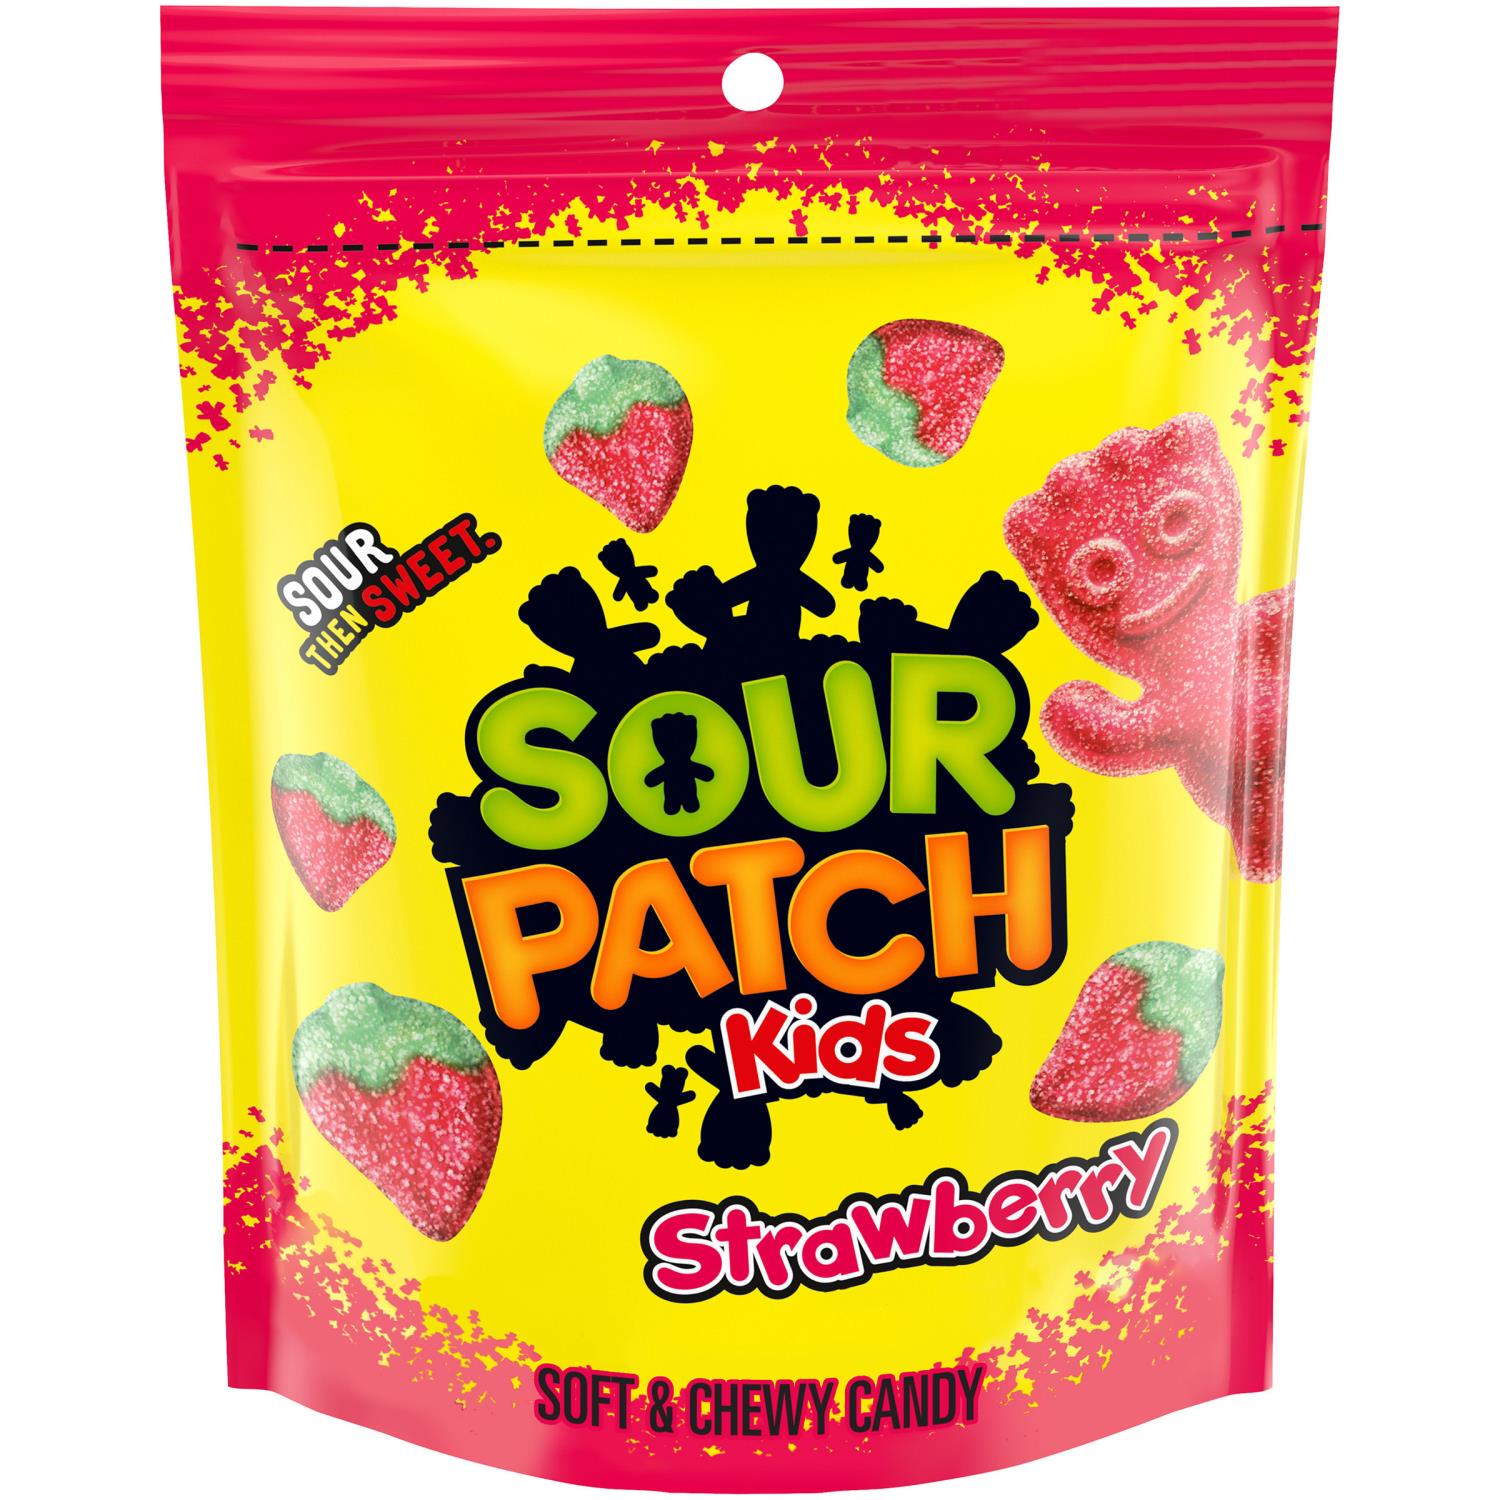 Sour patch strawberry